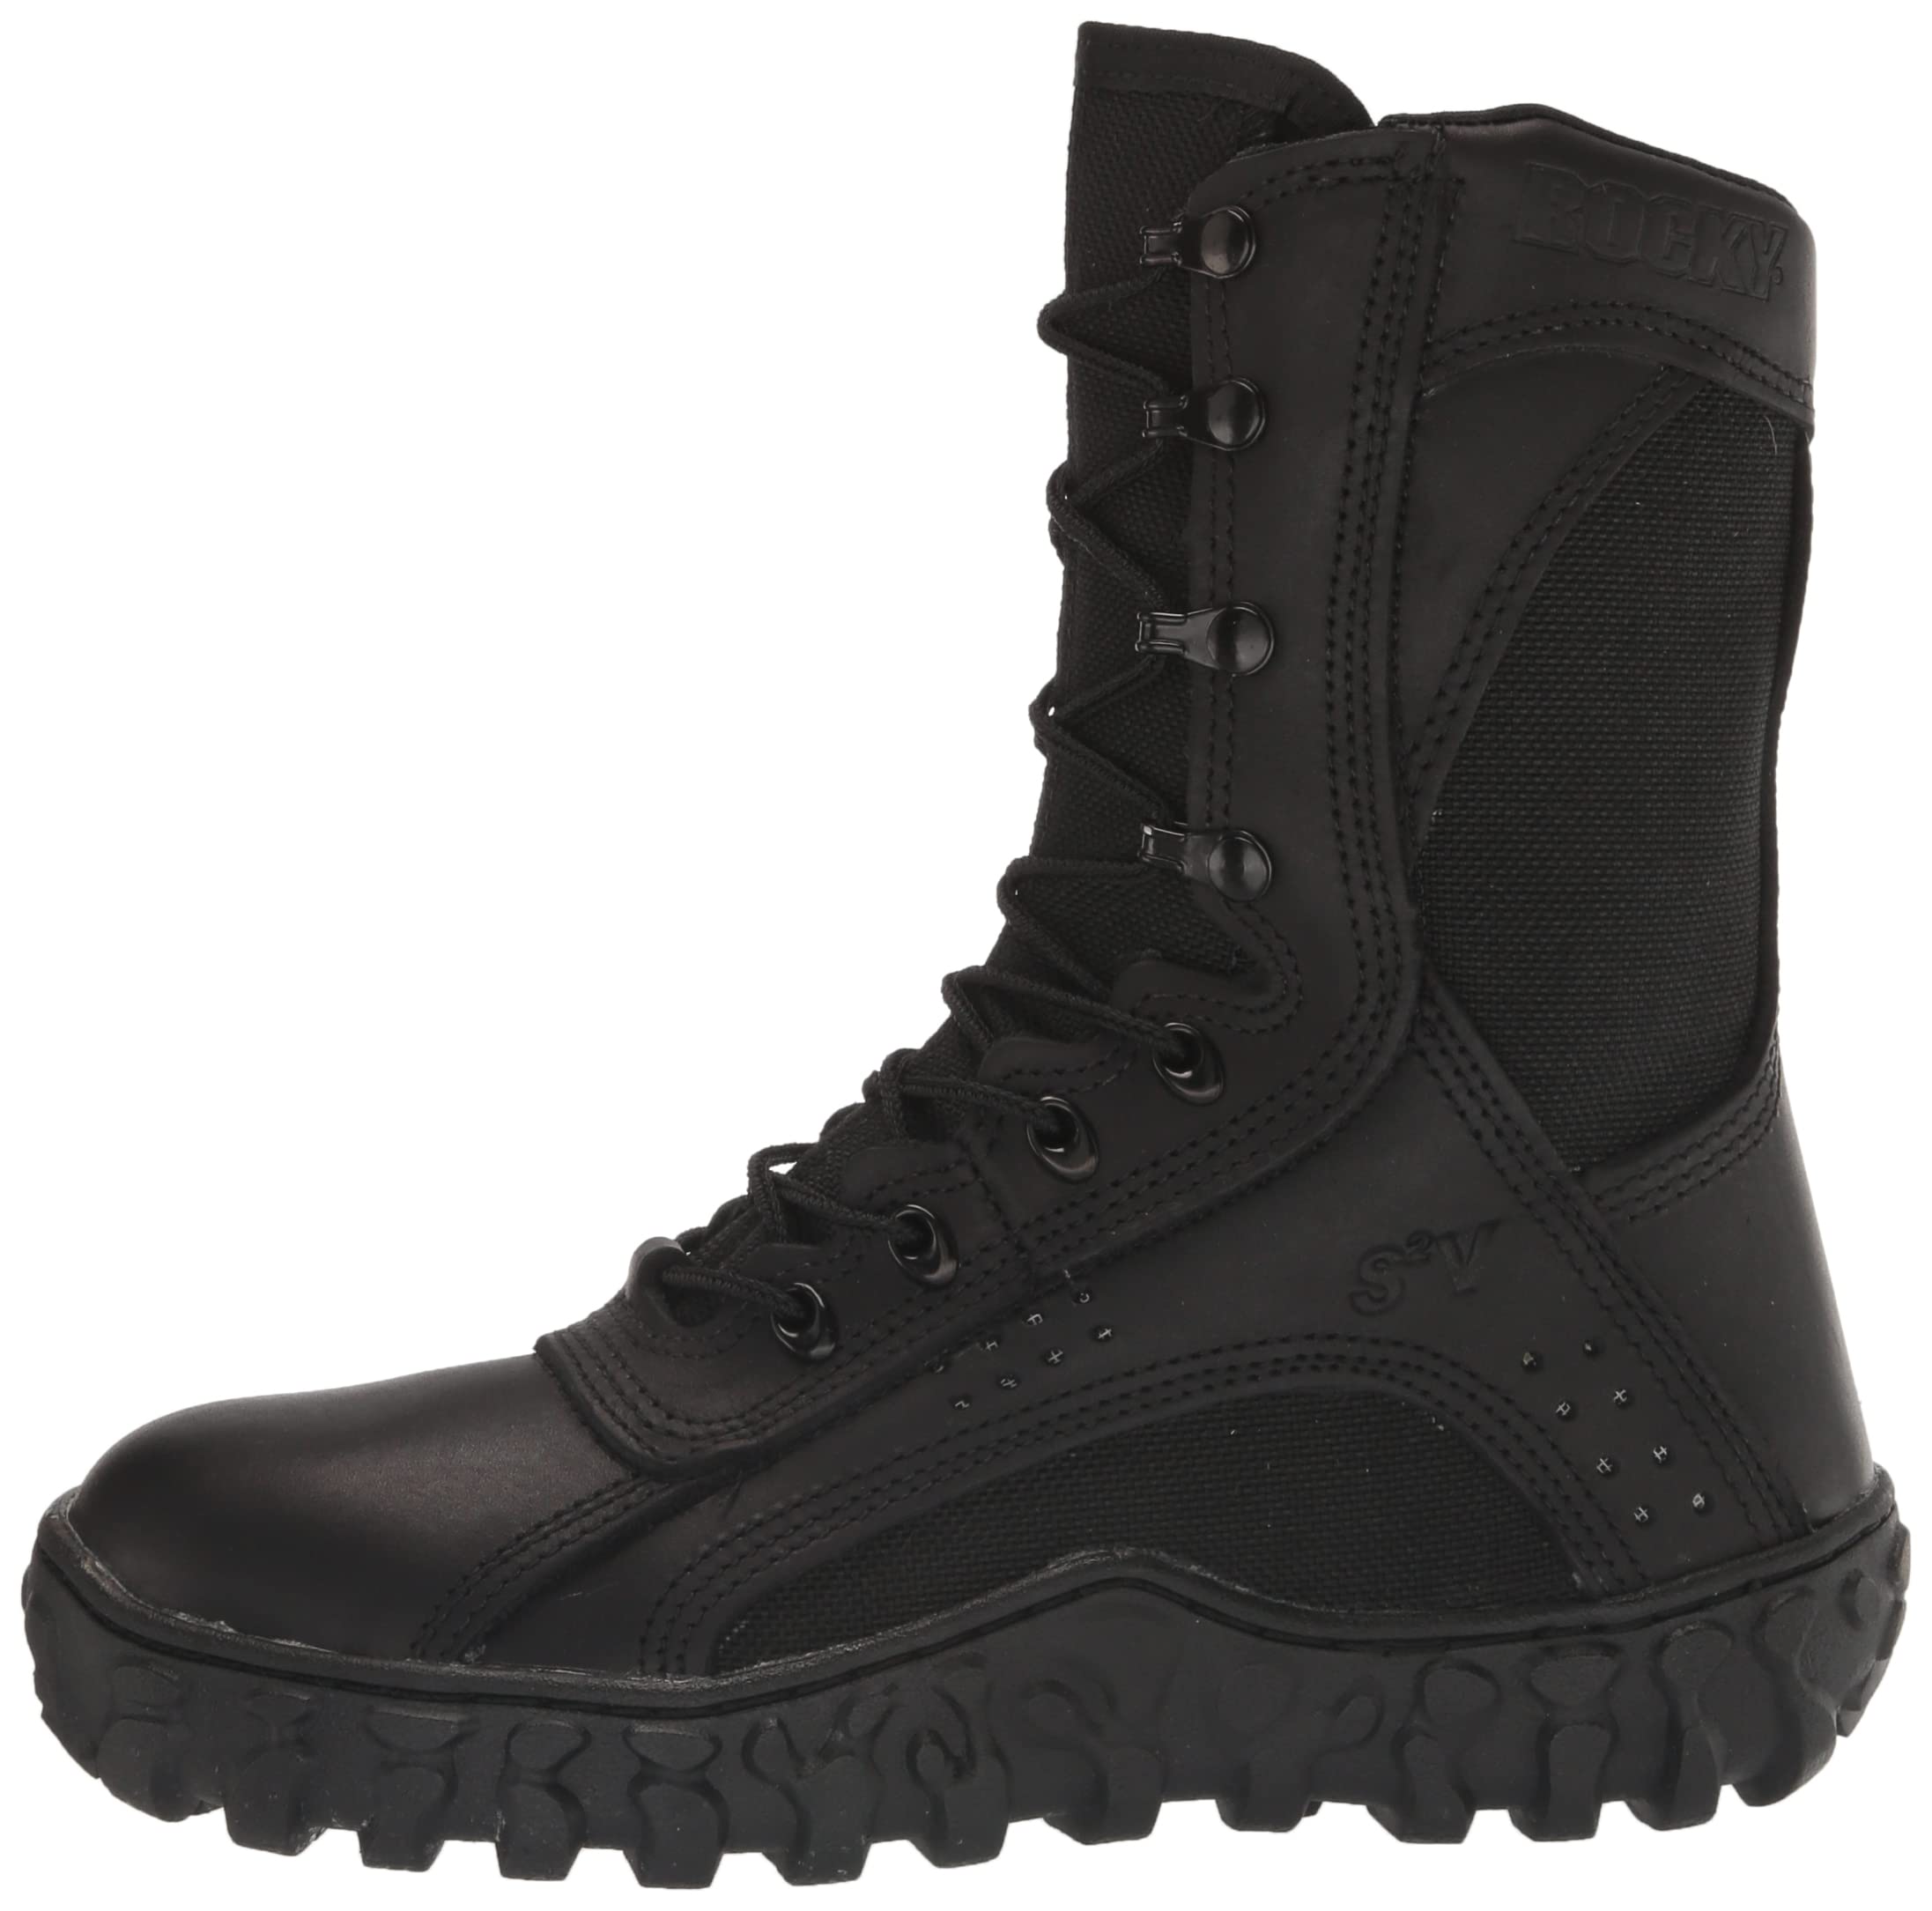 Rocky Men's FQ0000102 Military and Tactical Boot, Black, 15 W US